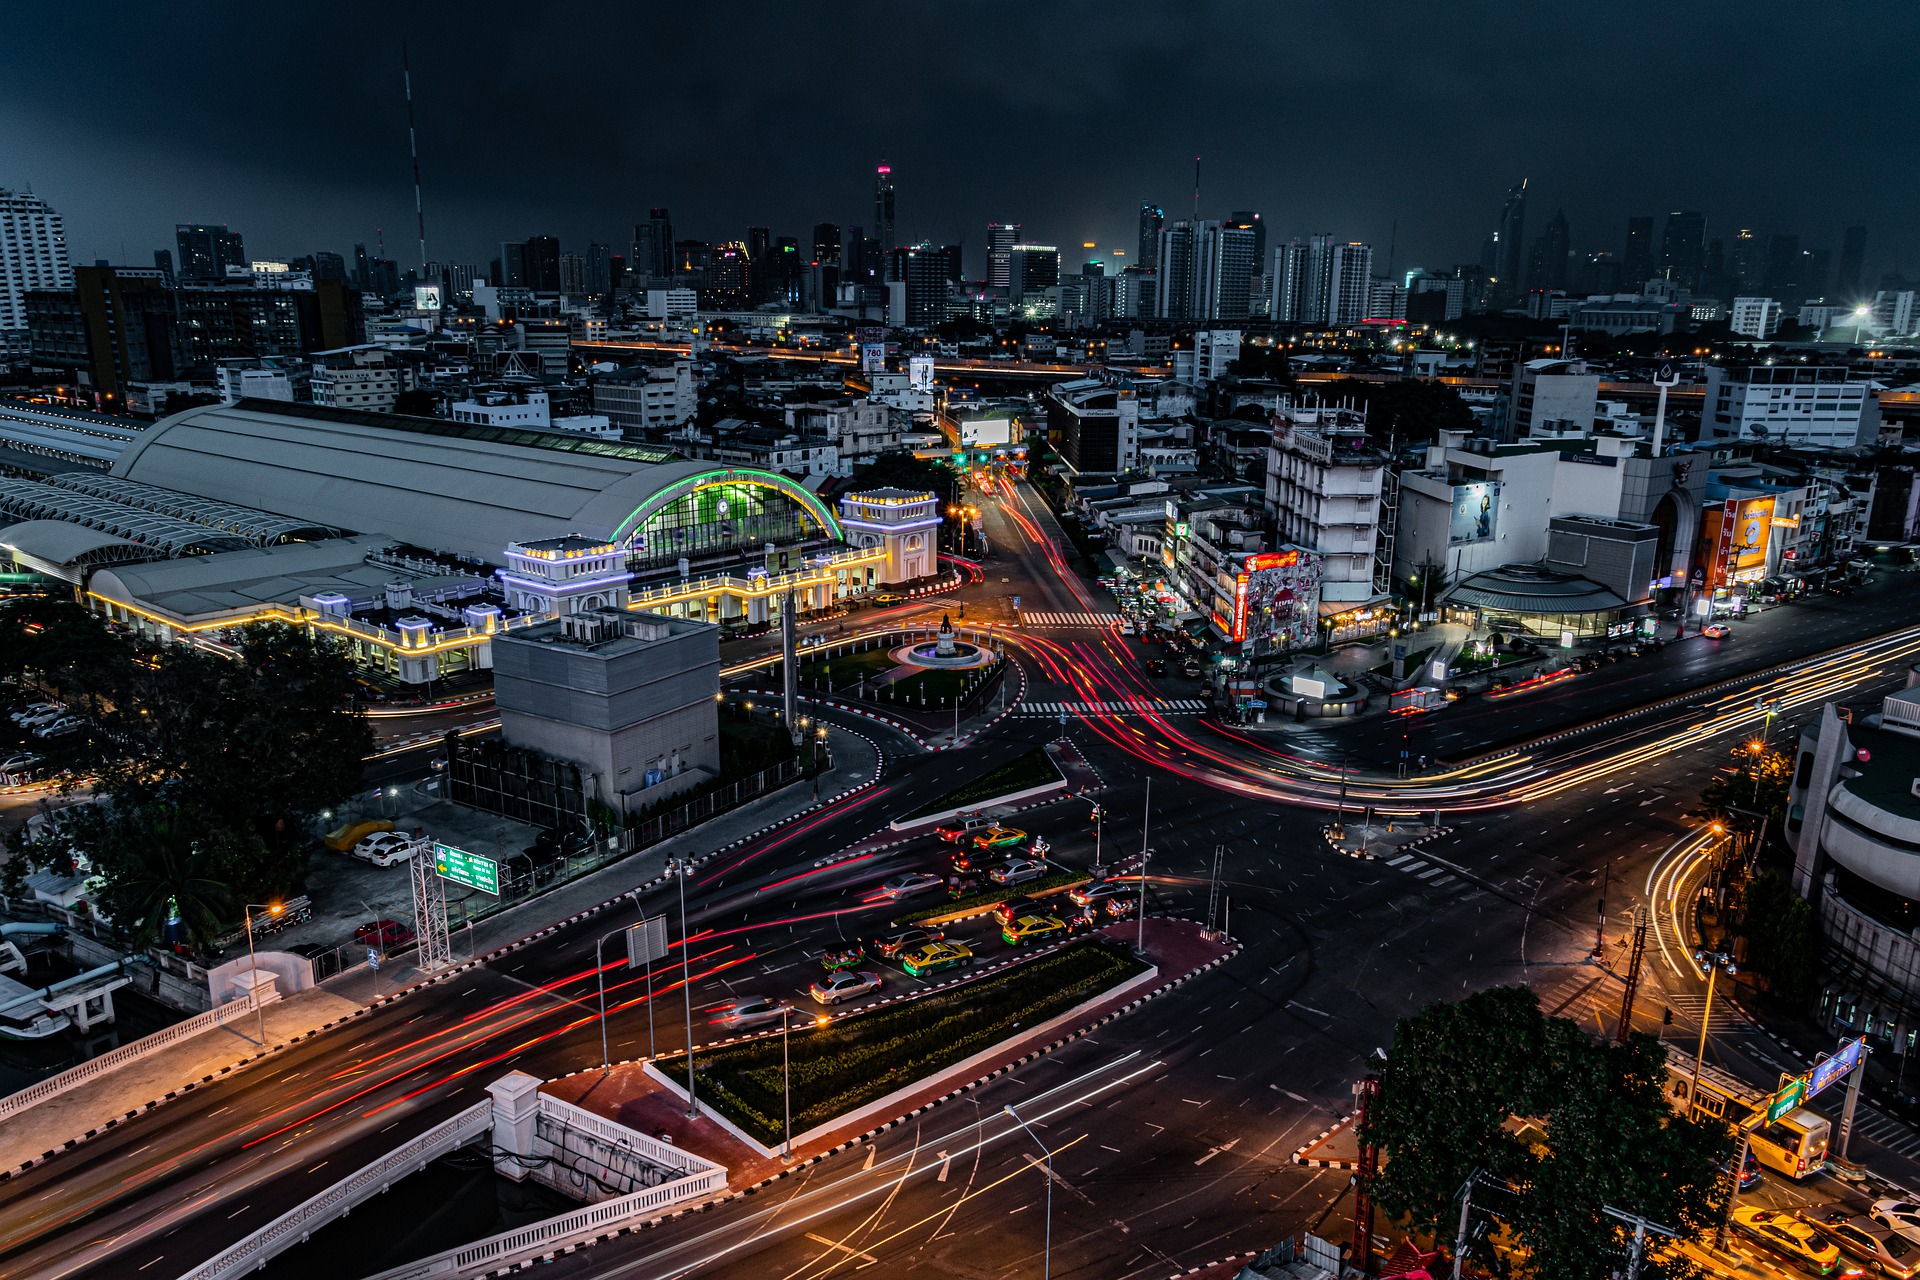 Thailand to Define ‘Red Lines‘ for Crypto in Early 2022